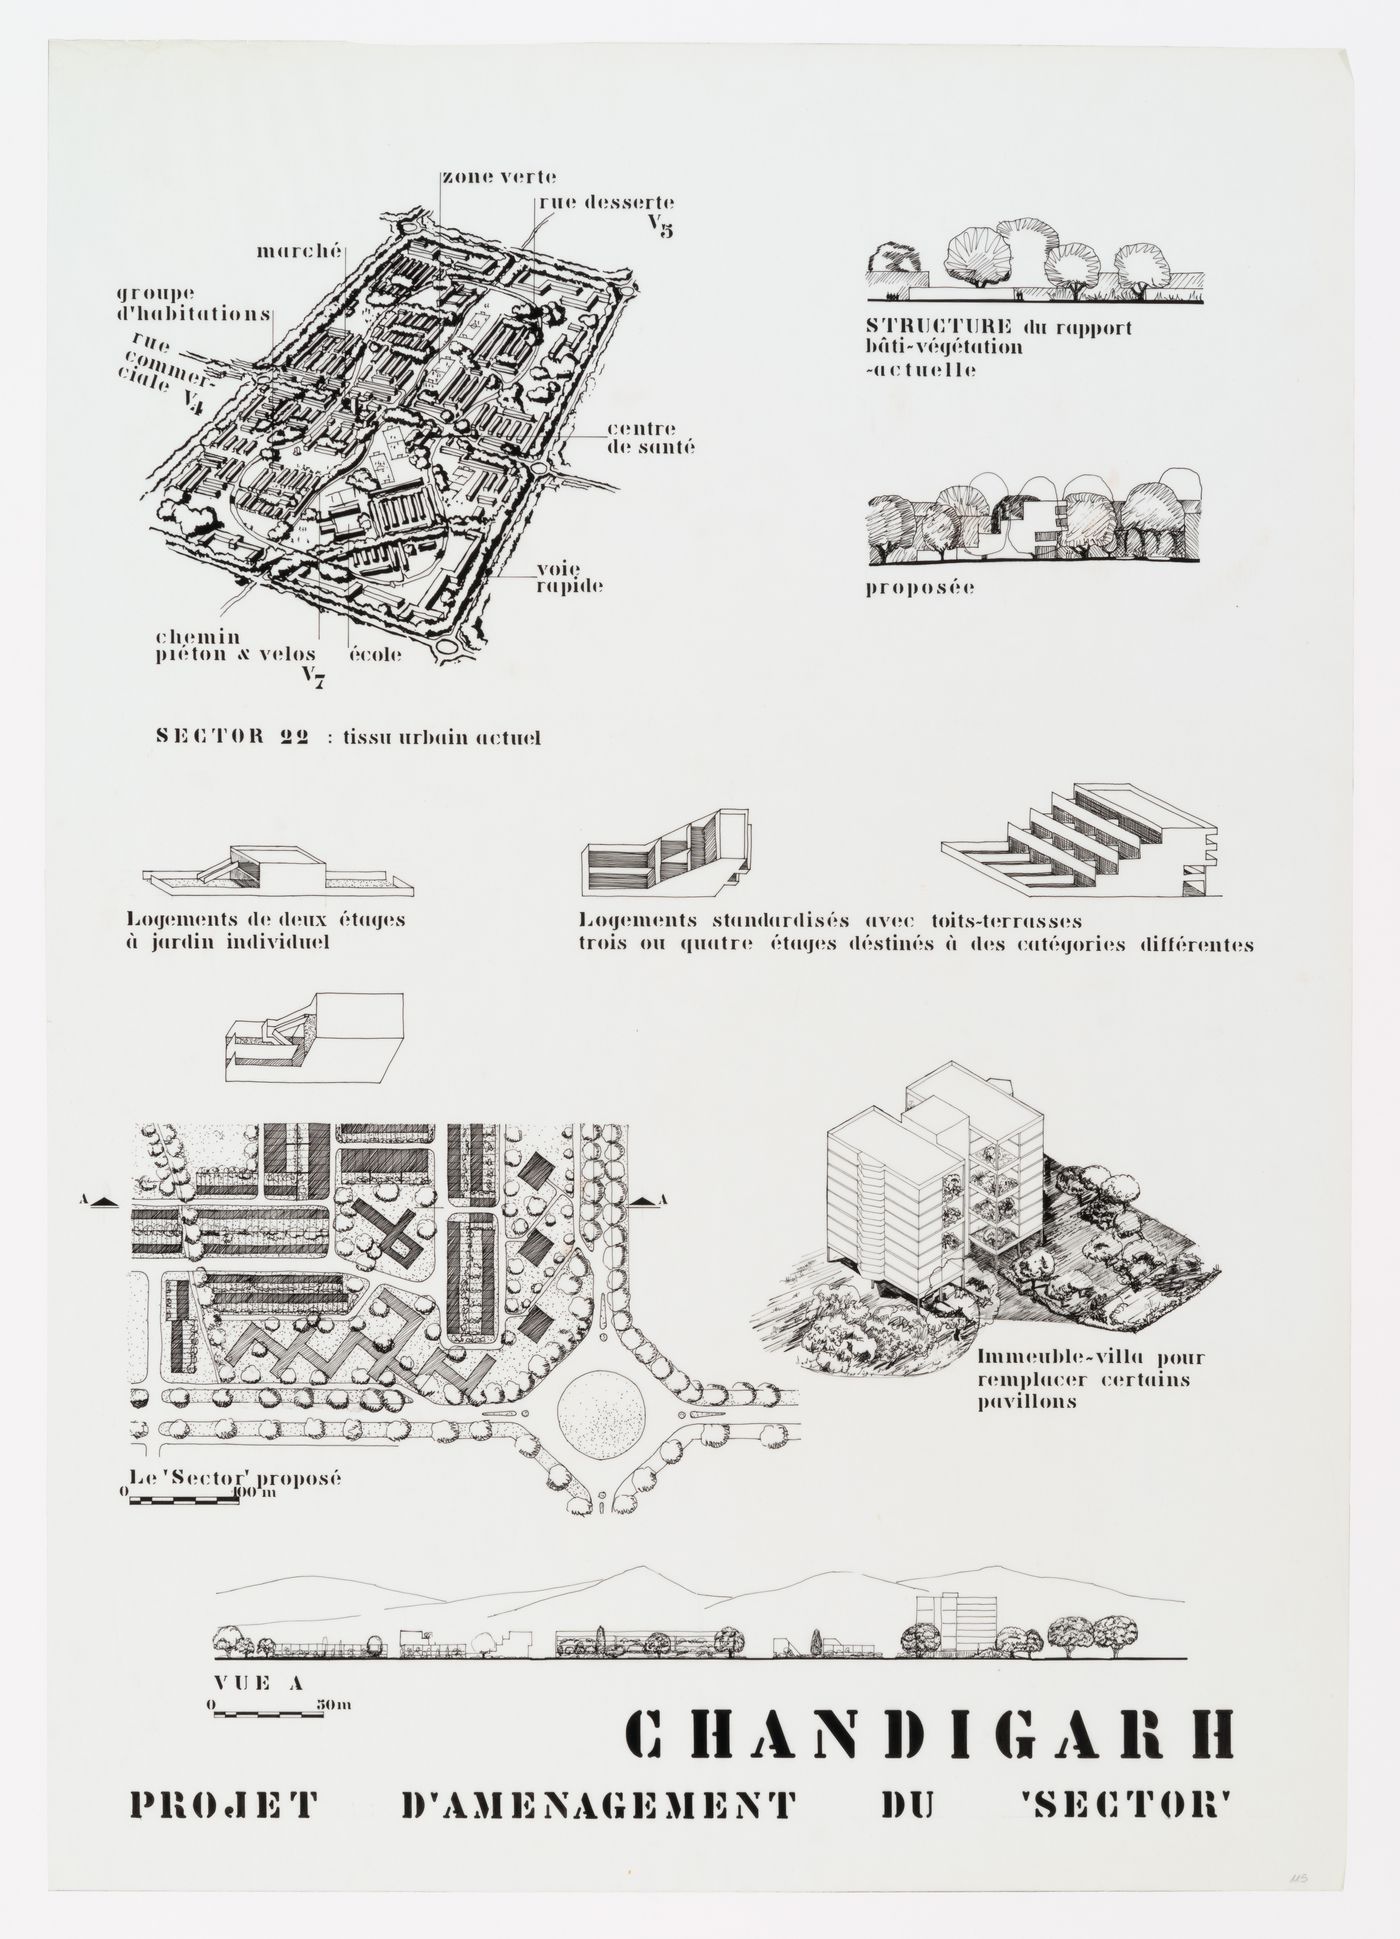 Layout plan for Chandigarh, India